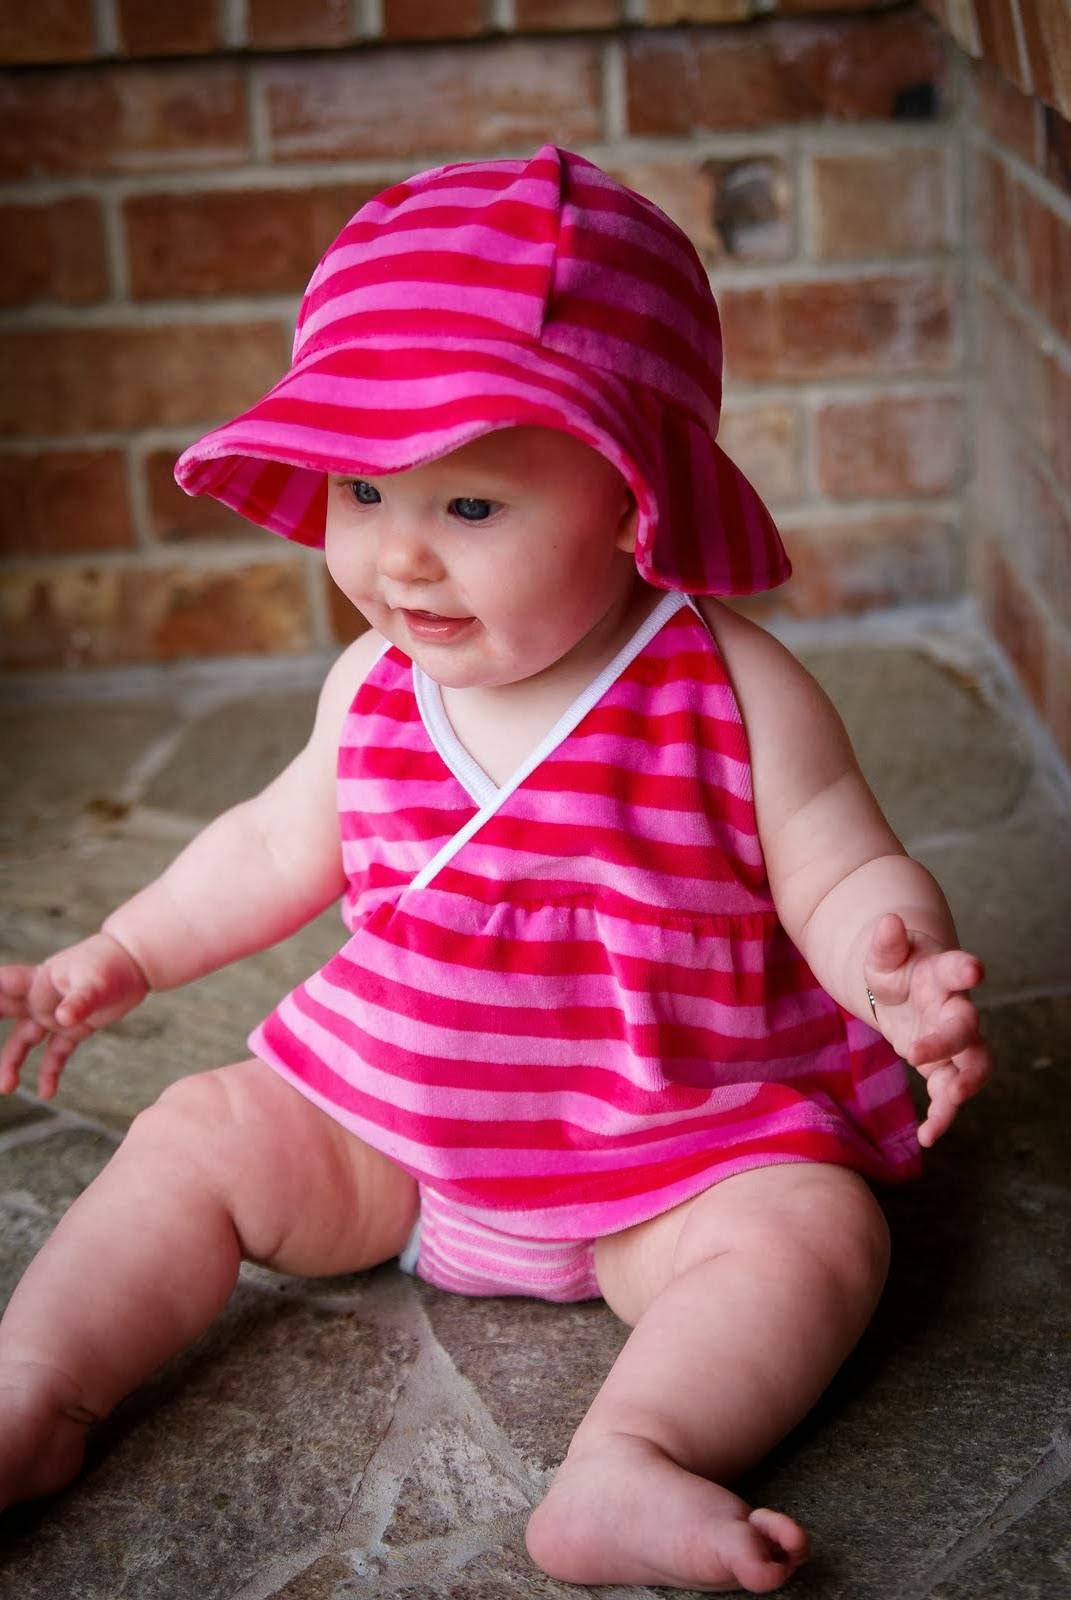 Fascinating Articles and Cool Stuff: Cutest Babies in the World